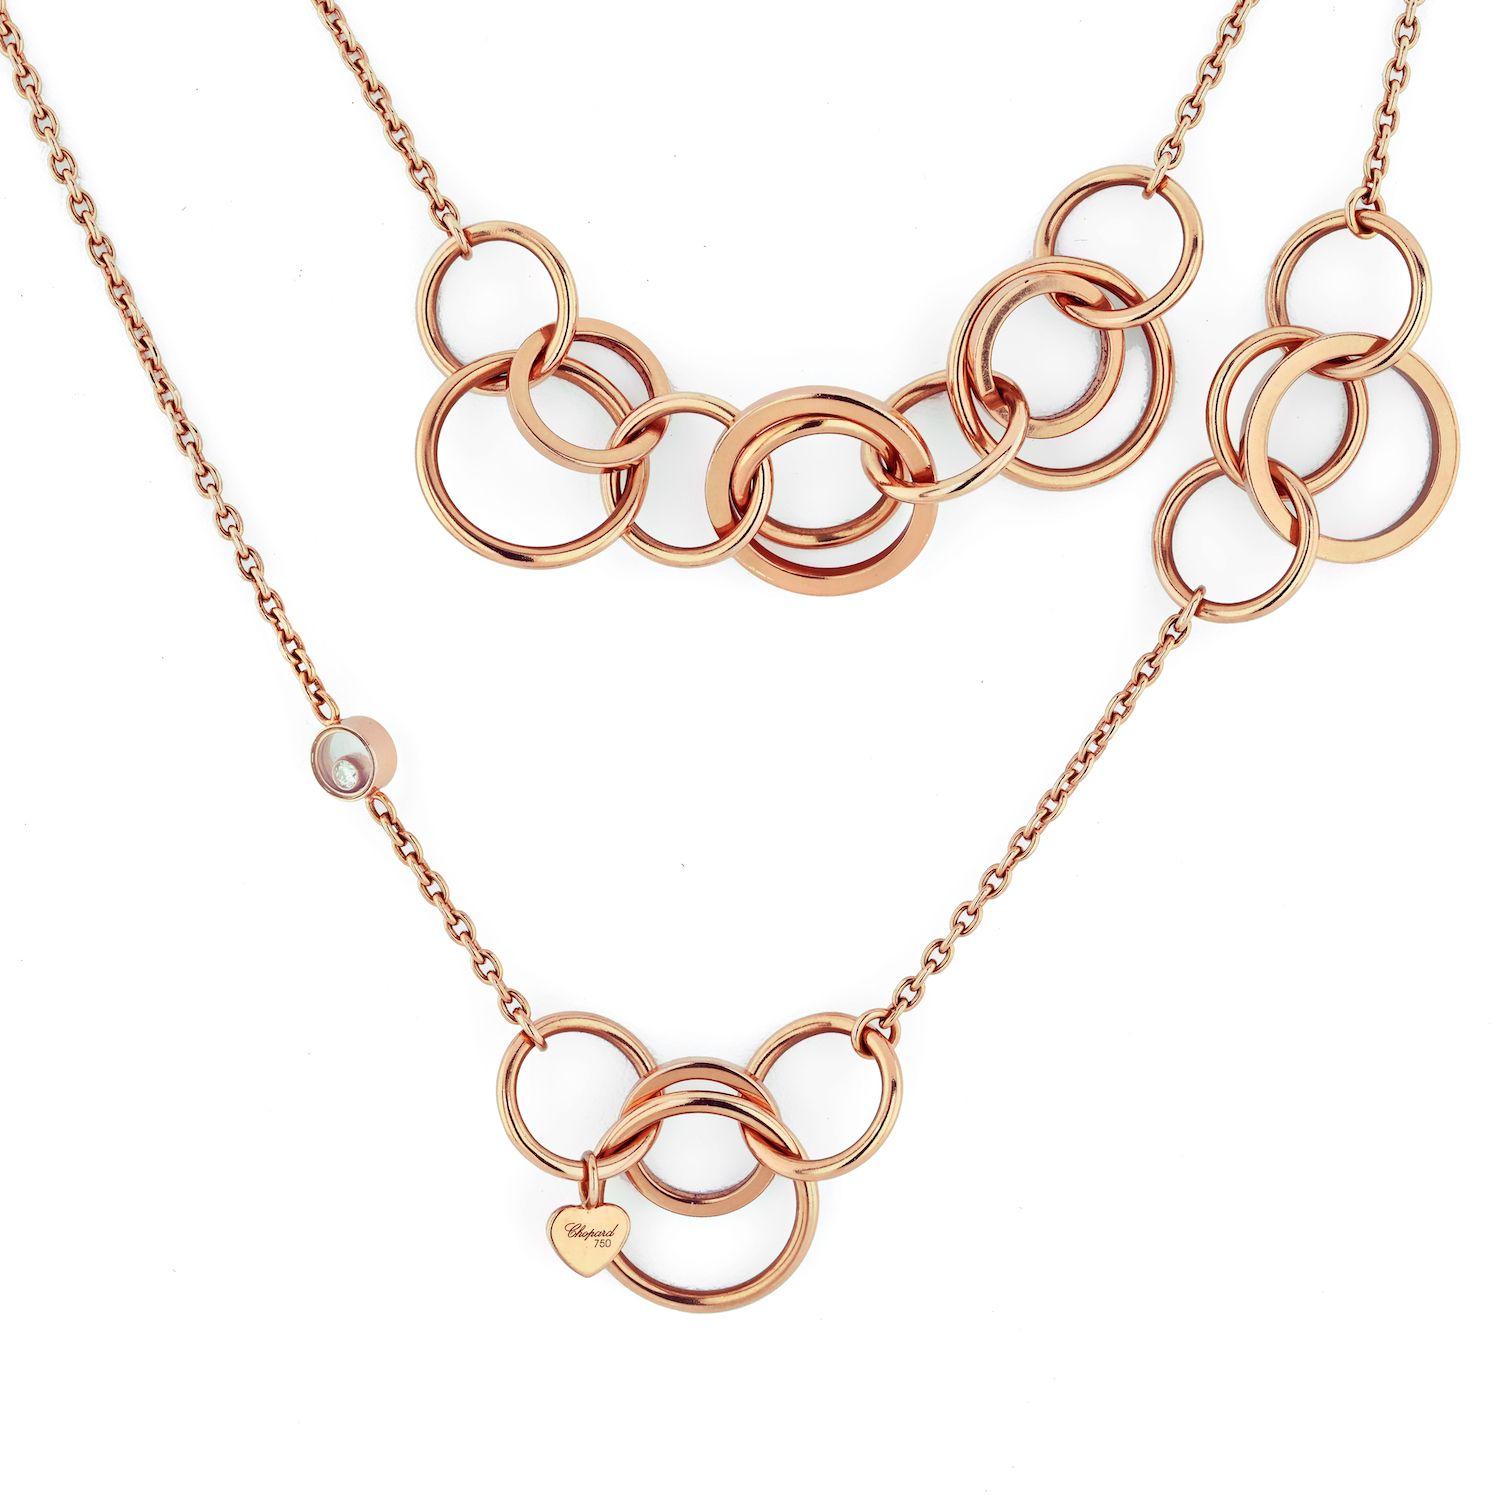 Lovely chain by Chopard in 18K Rose gold with stations of Happy Diamonds. Total length 47 inches. 53grams. 